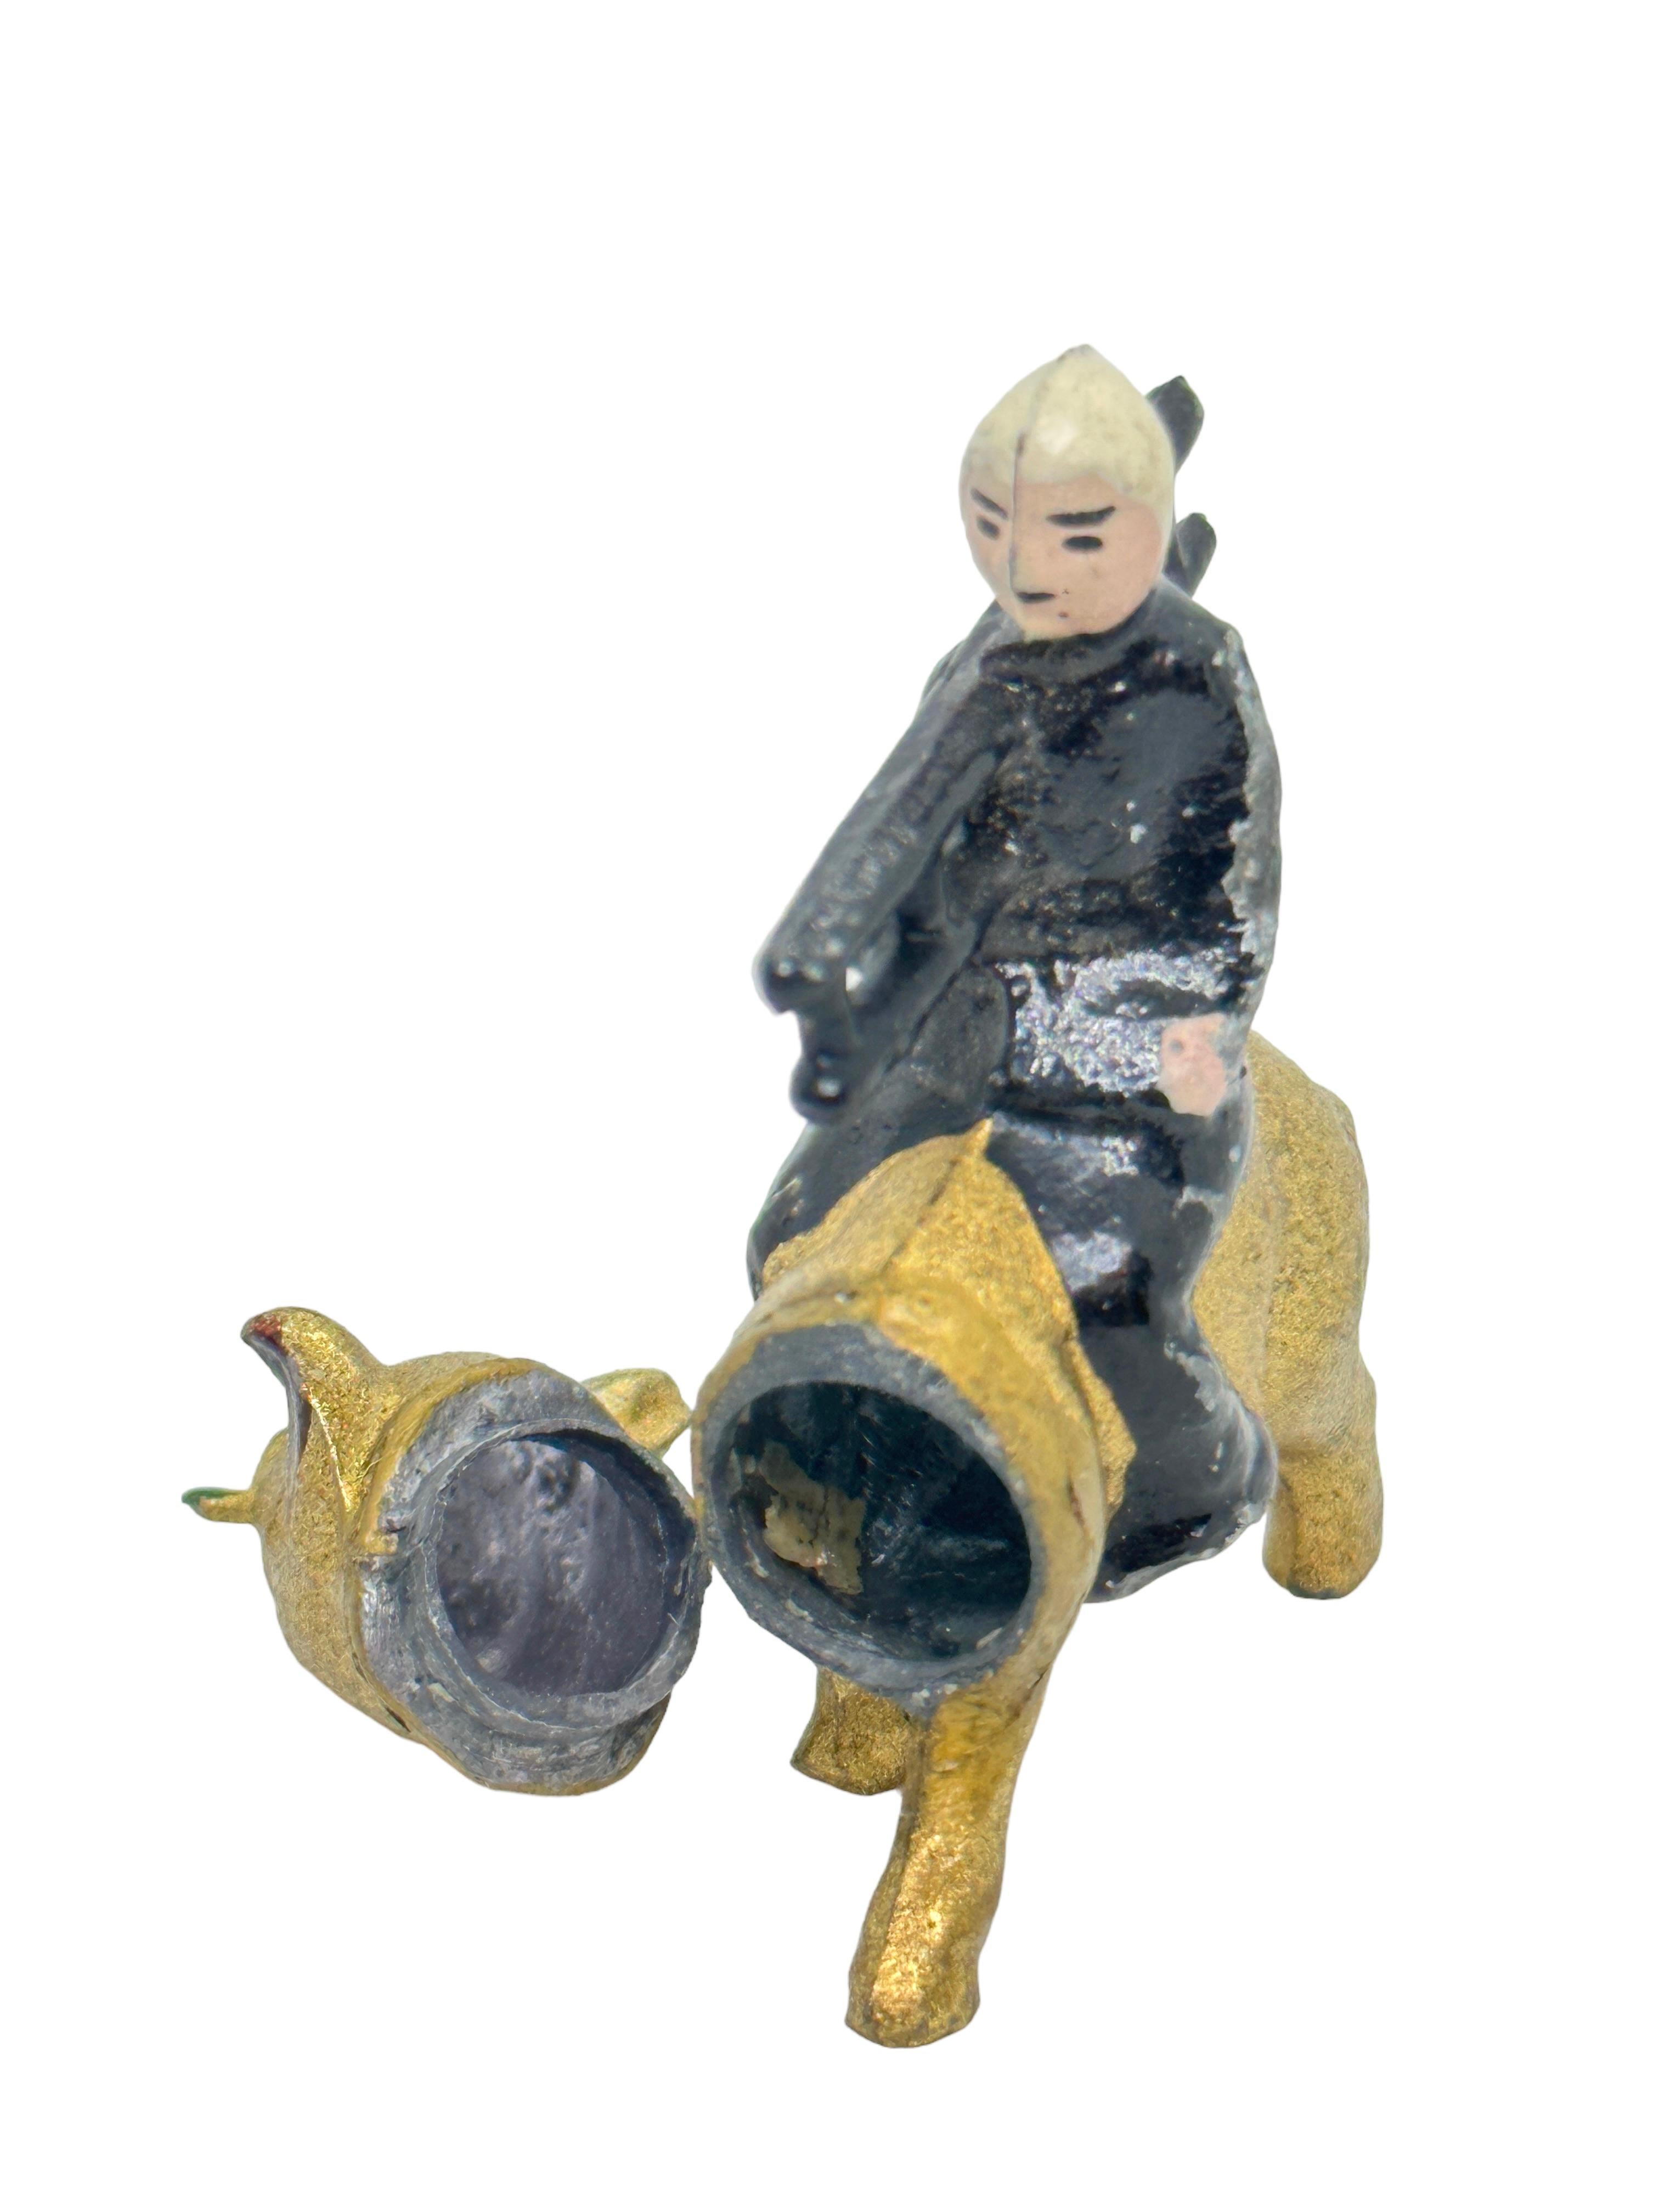 Pig & Chimney Sweep Lucky Charm, Candy Secret Chamber Container, Antique, 1900s In Good Condition For Sale In Nuernberg, DE